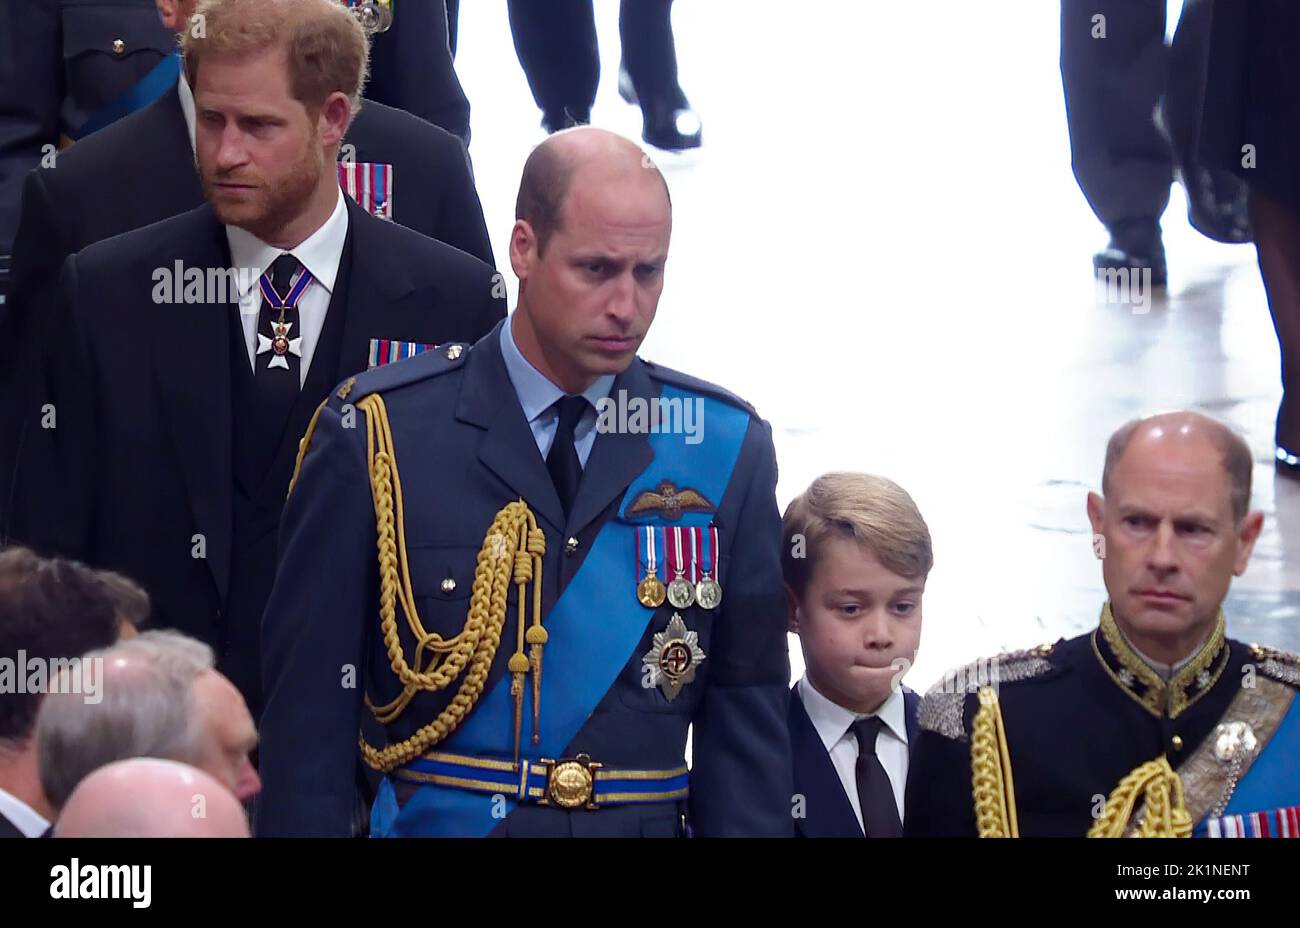 Queen’s State Funeral 19.9.22Westminster Abbey  Coffin arrives at Westminster Abbey  with Princes William Harry and George Picture by Pixel8000 Stock Photo